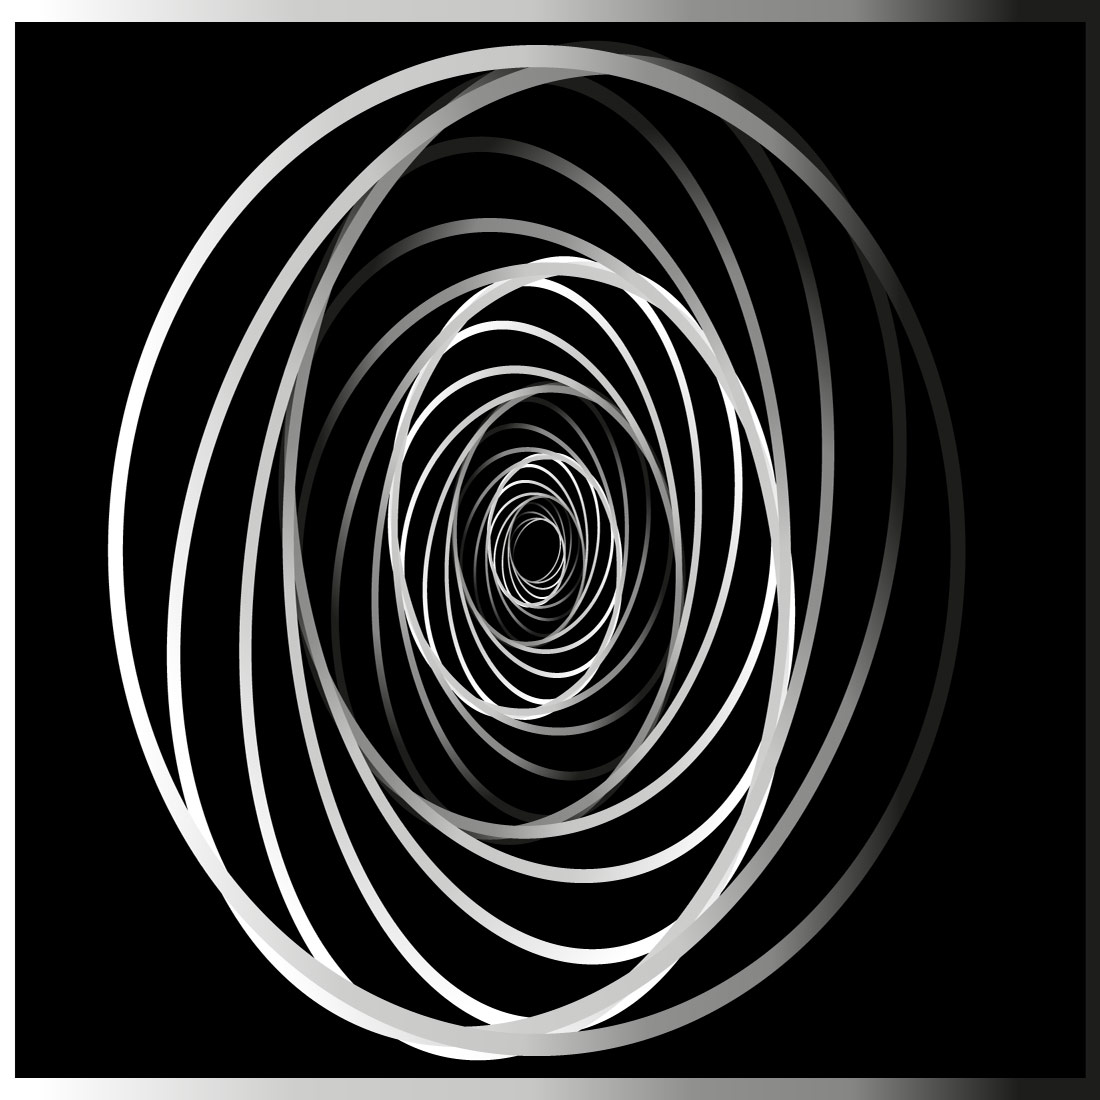 Gradient background with black and white spirals preview image.